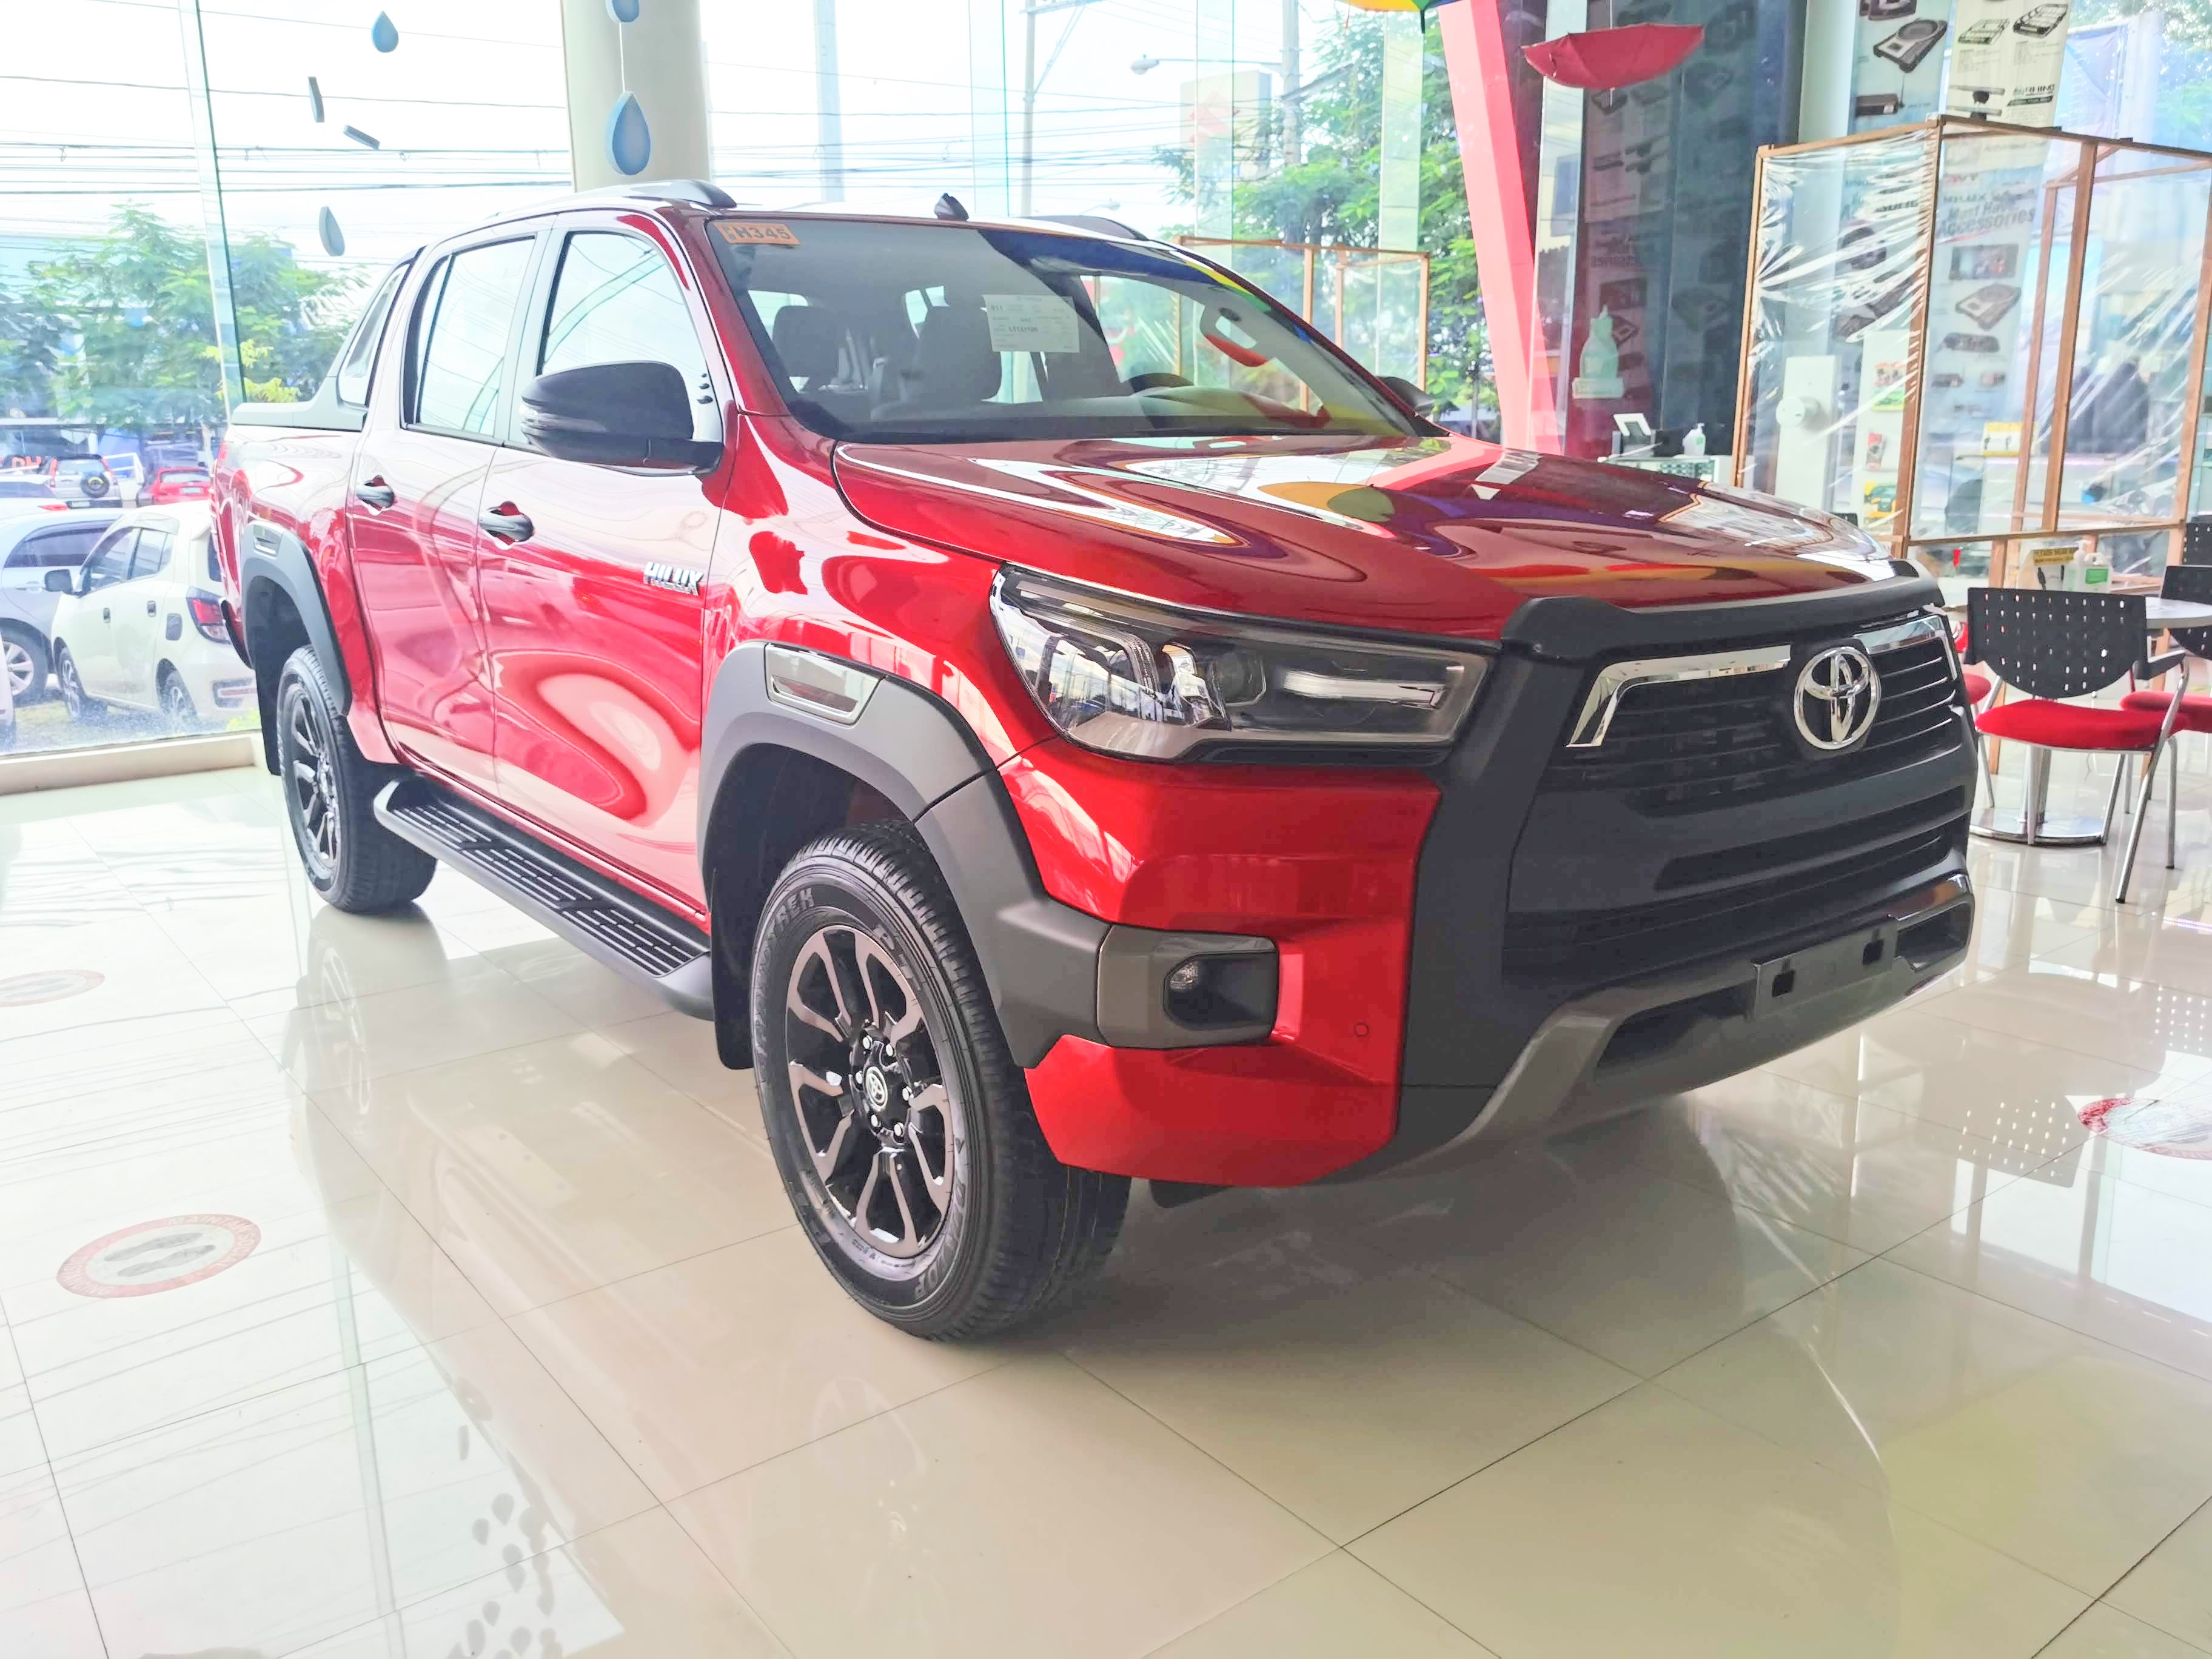 Toyota Hilux Conquest - Emotional Red